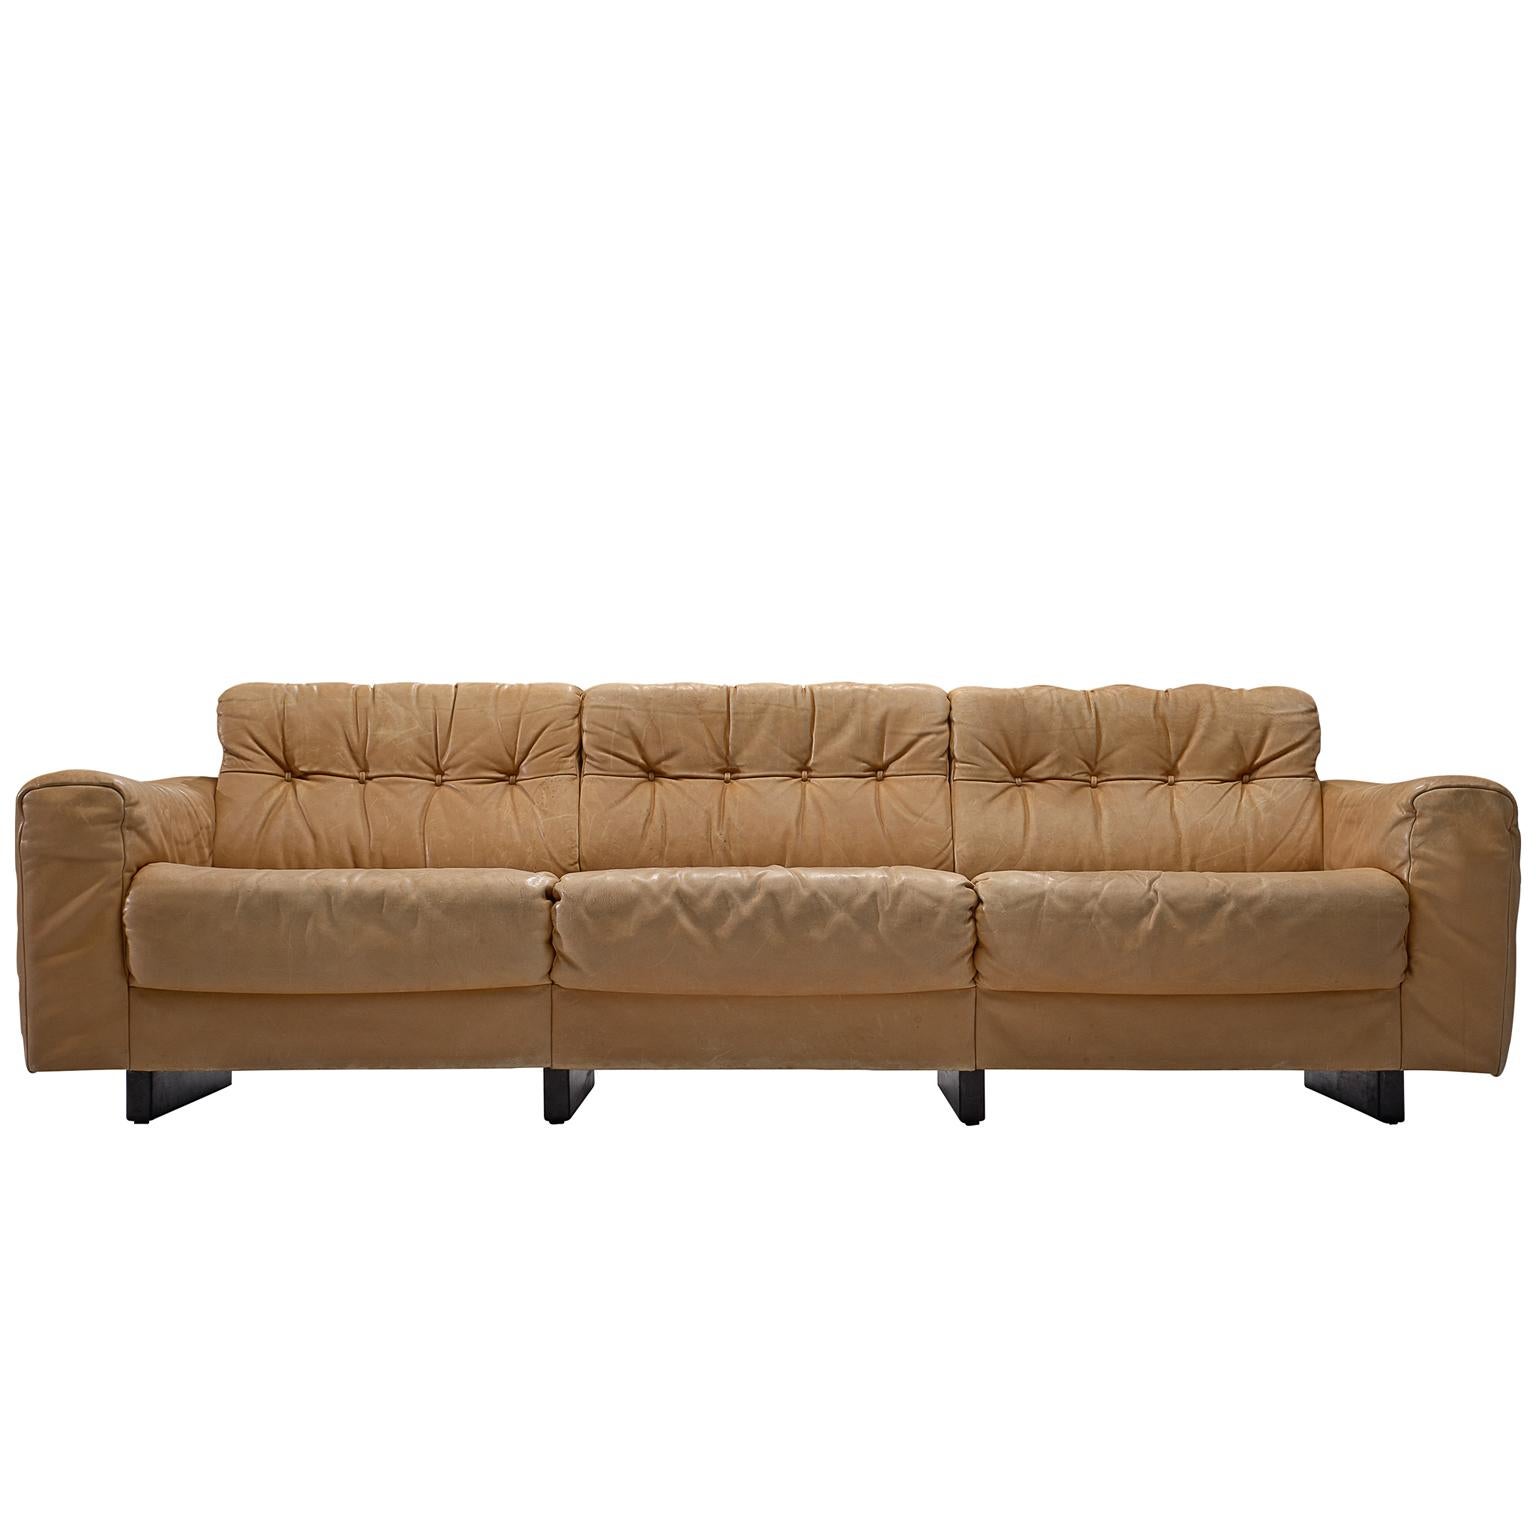 De Sede, three-seat sofa model 'DS-40', cognac leather, Switzerland, 1970s. 

This voluptuous sofa is a true delight to sit in. The thick cushions on armrests, seat and back support the sitter exquisitely. The design of the sofa is grand, bulky and